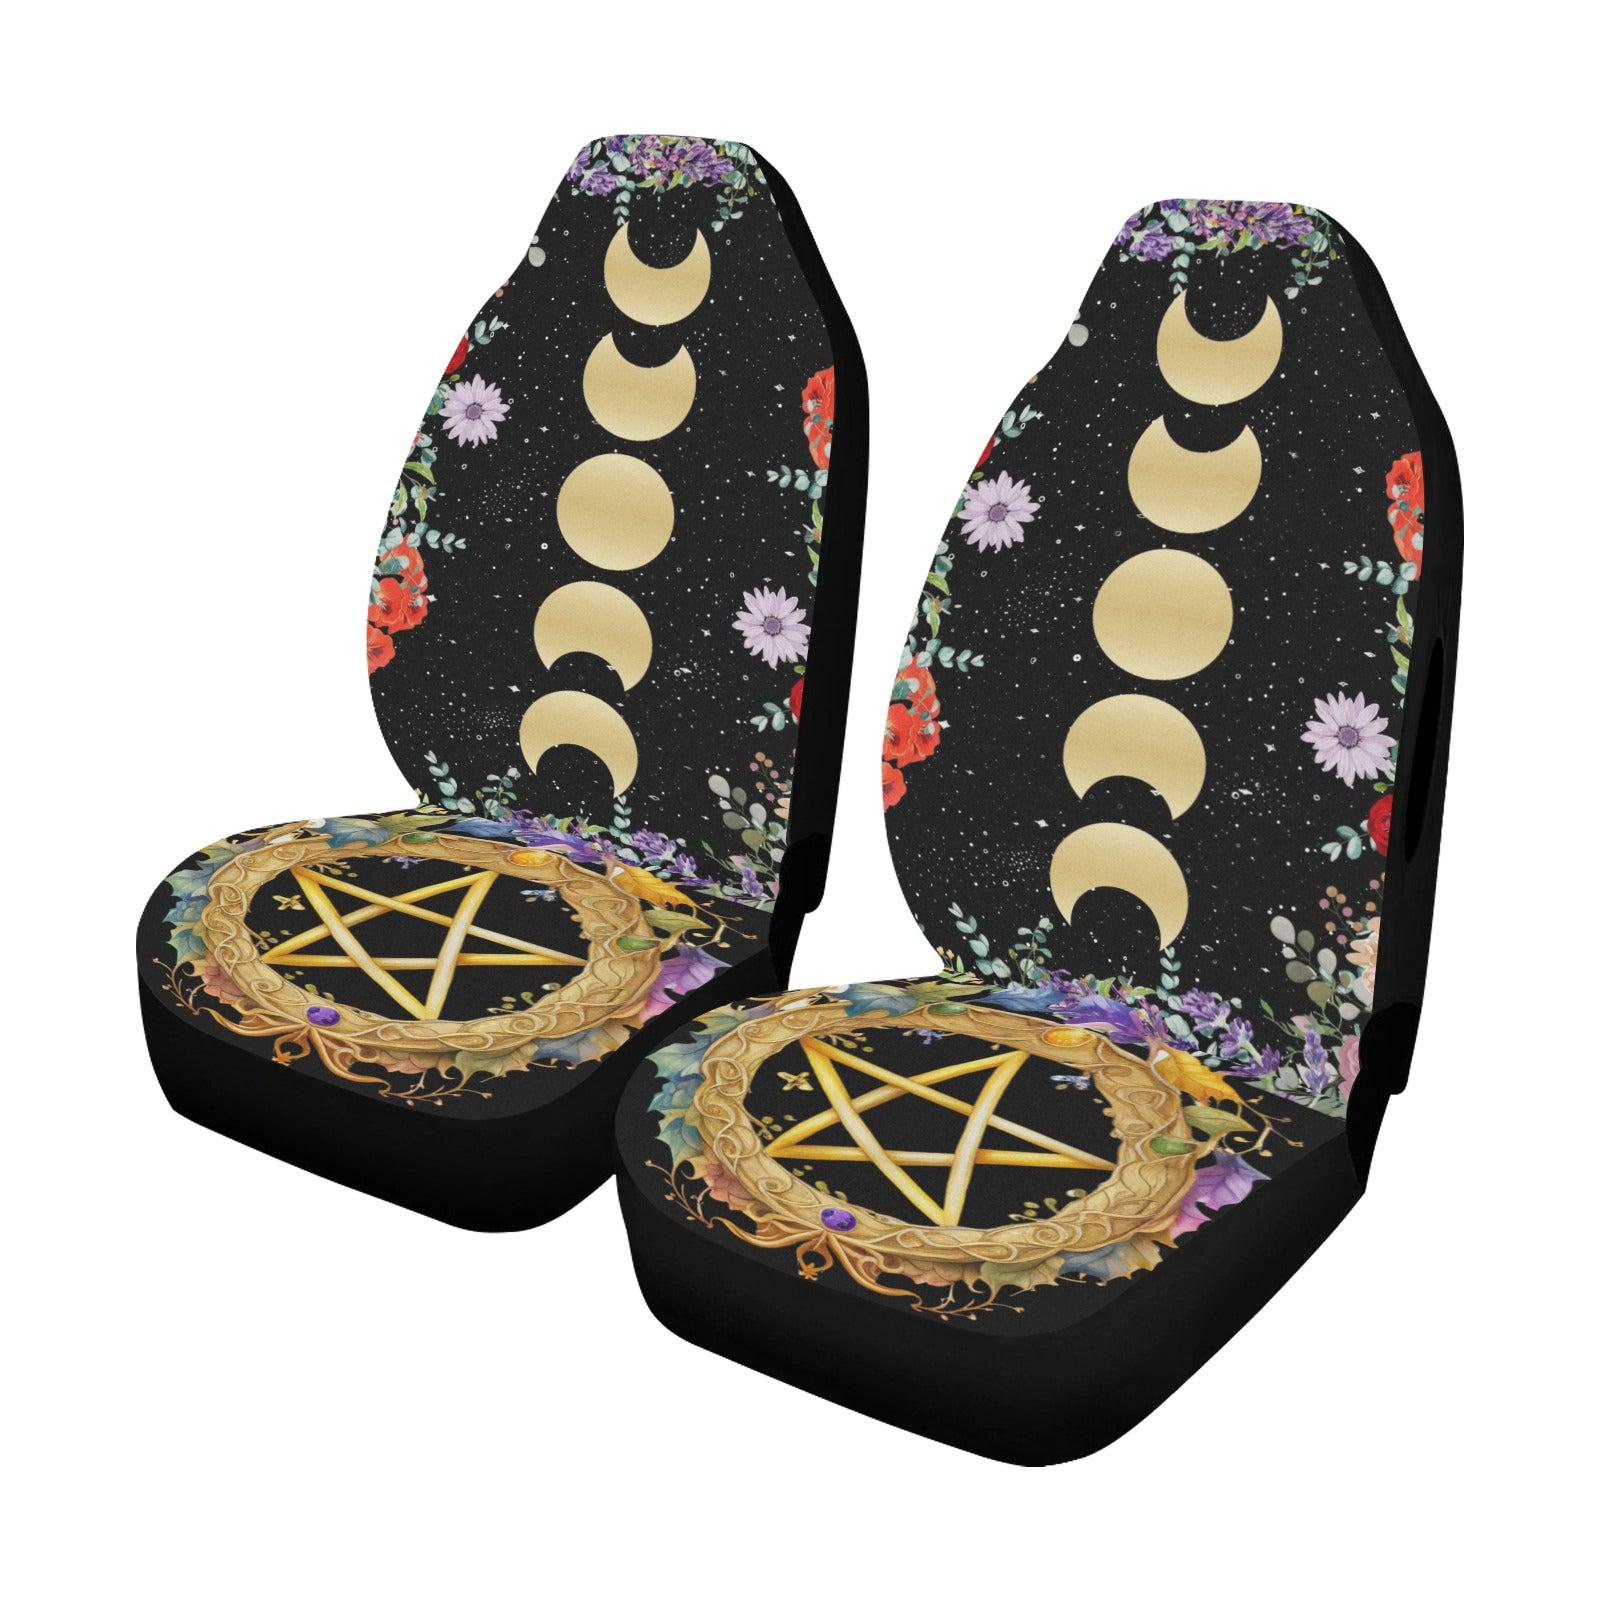 Pentacle Moon phases Car Seat Covers-MoonChildWorld